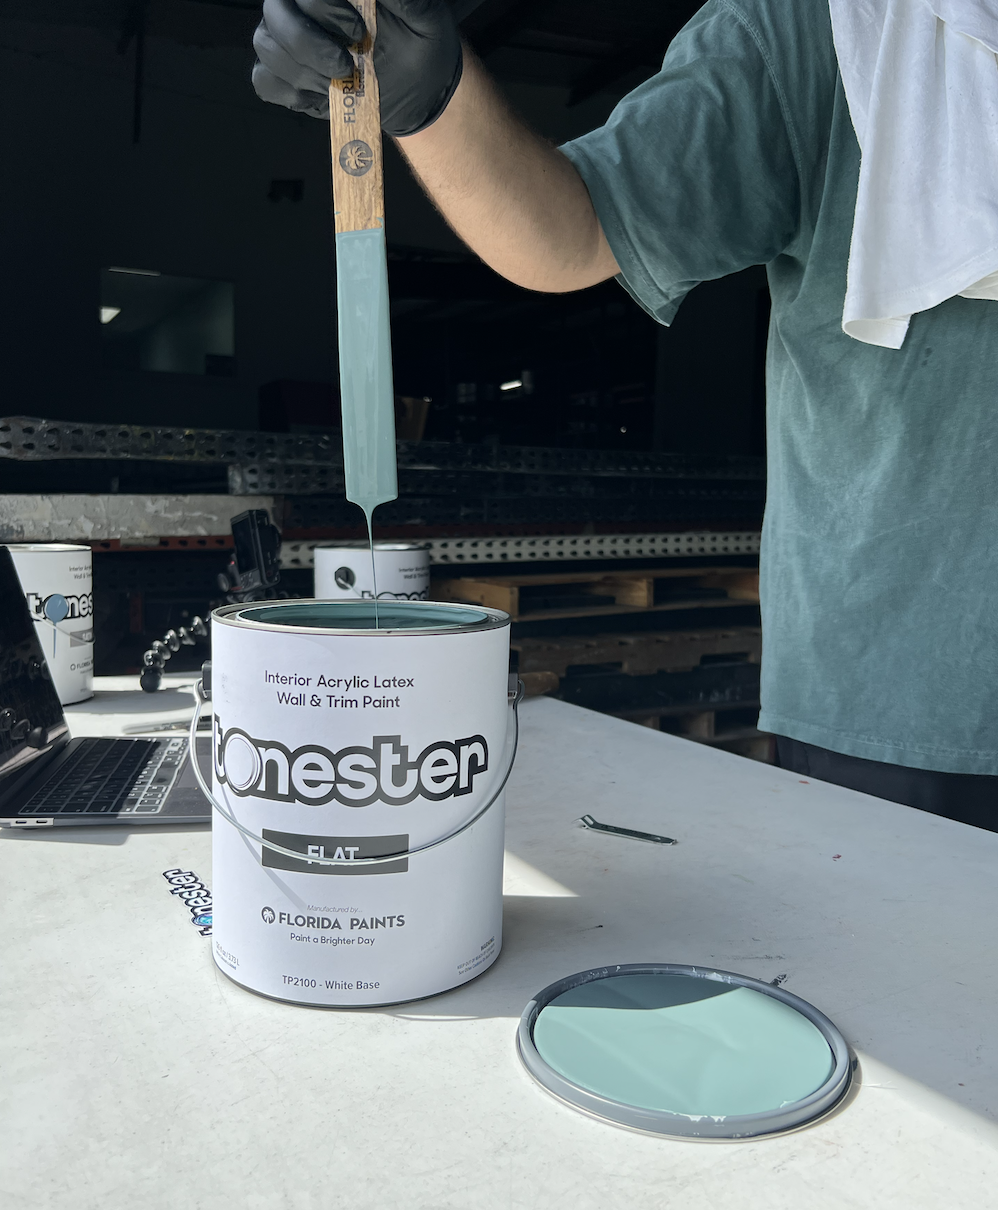 Maronda Celebrates 50 Years of Home Building with TonesterPaints Collab